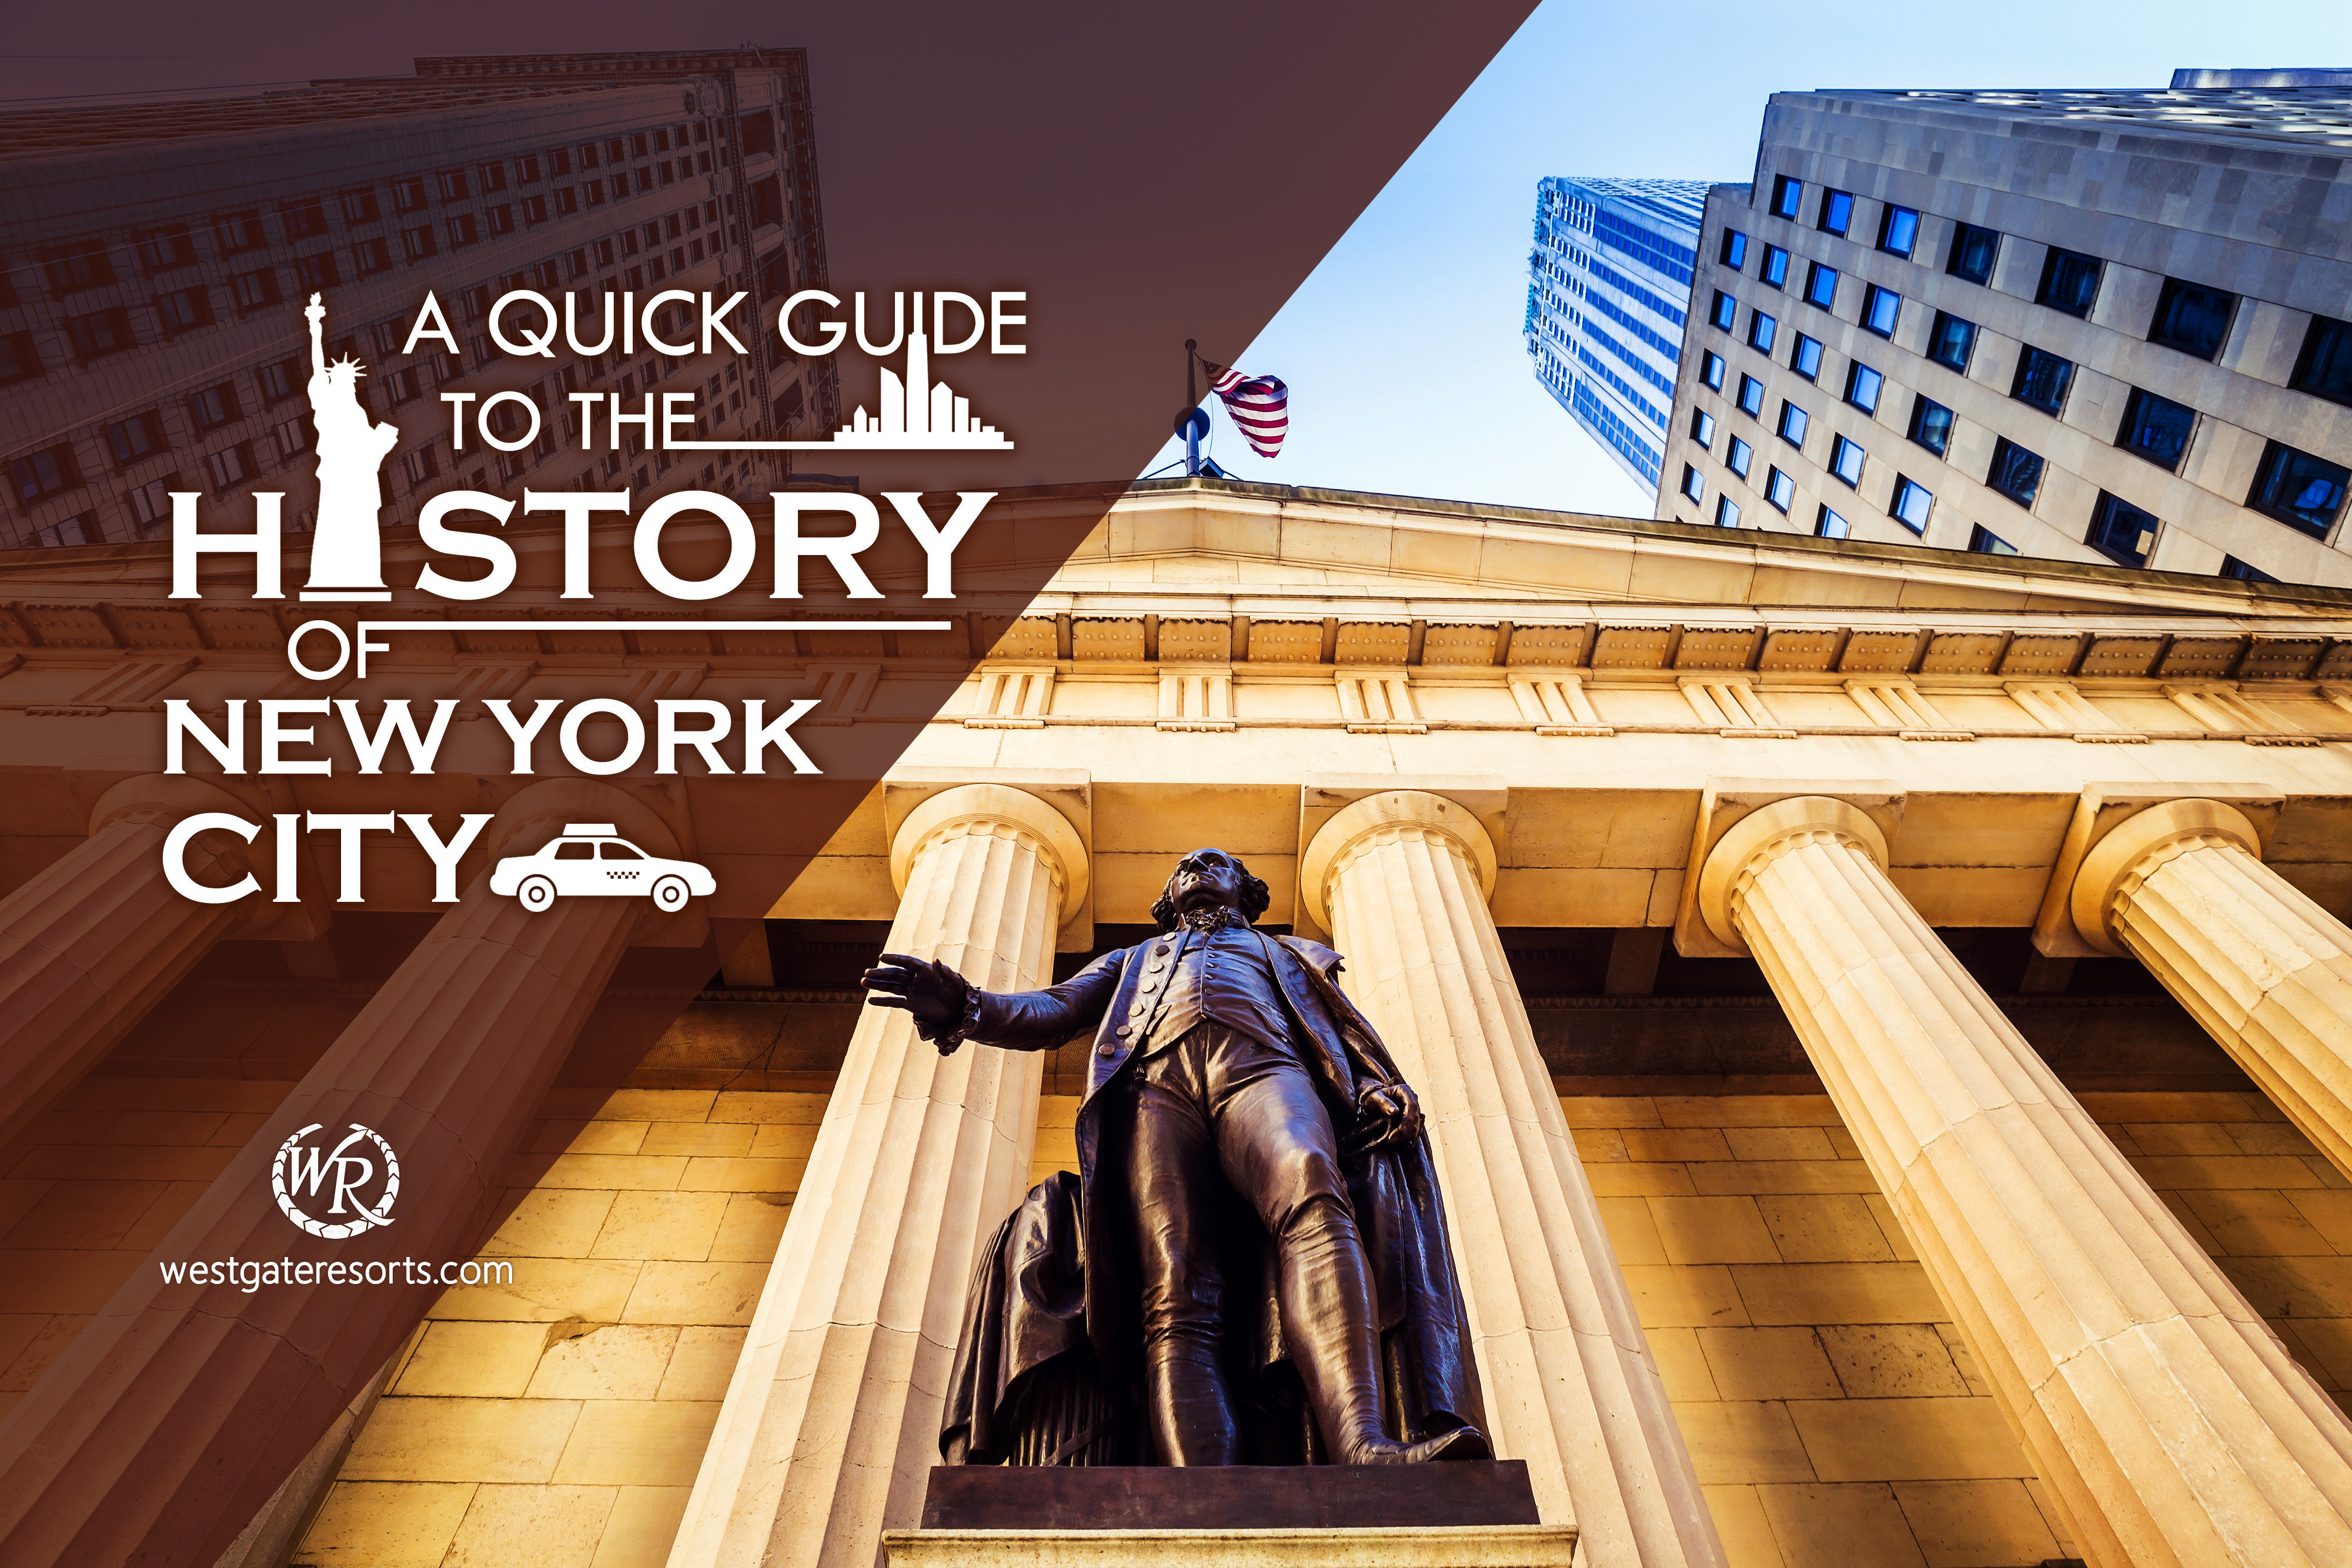 A Quick Guide to The History of New York City